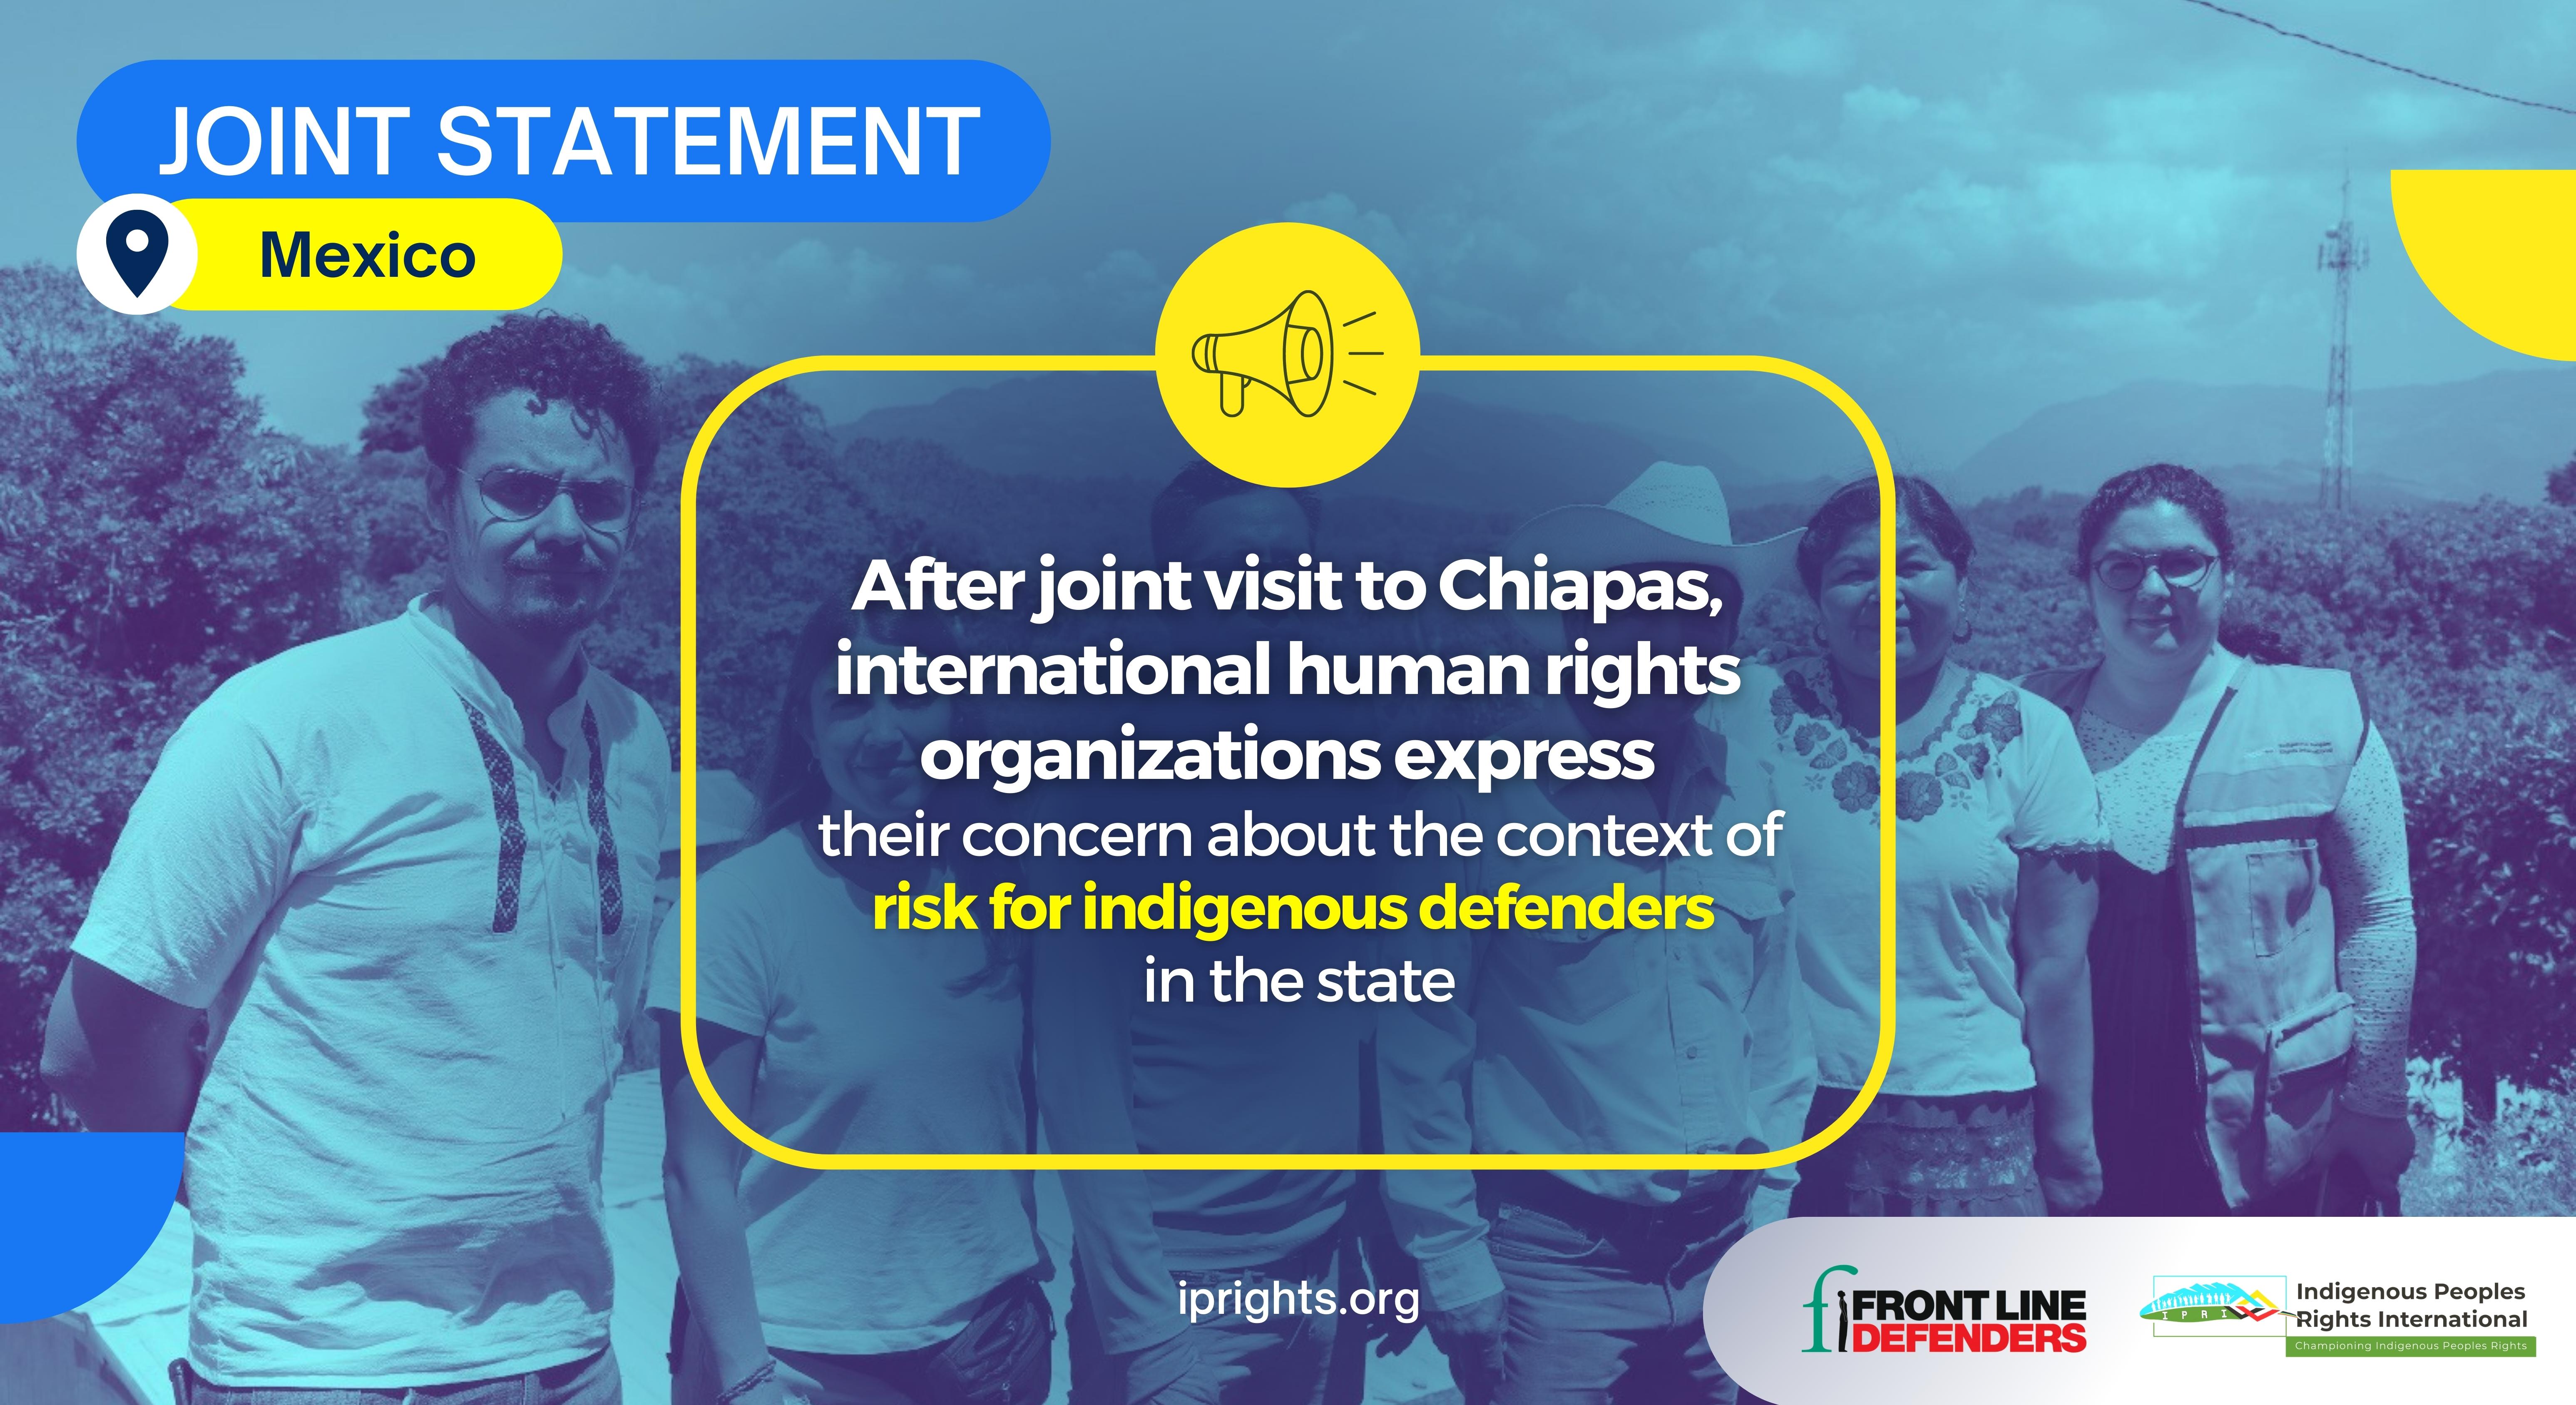 After joint visit to Chiapas, international human rights organizations express their concern about the context of risk for indigenous defenders in the state